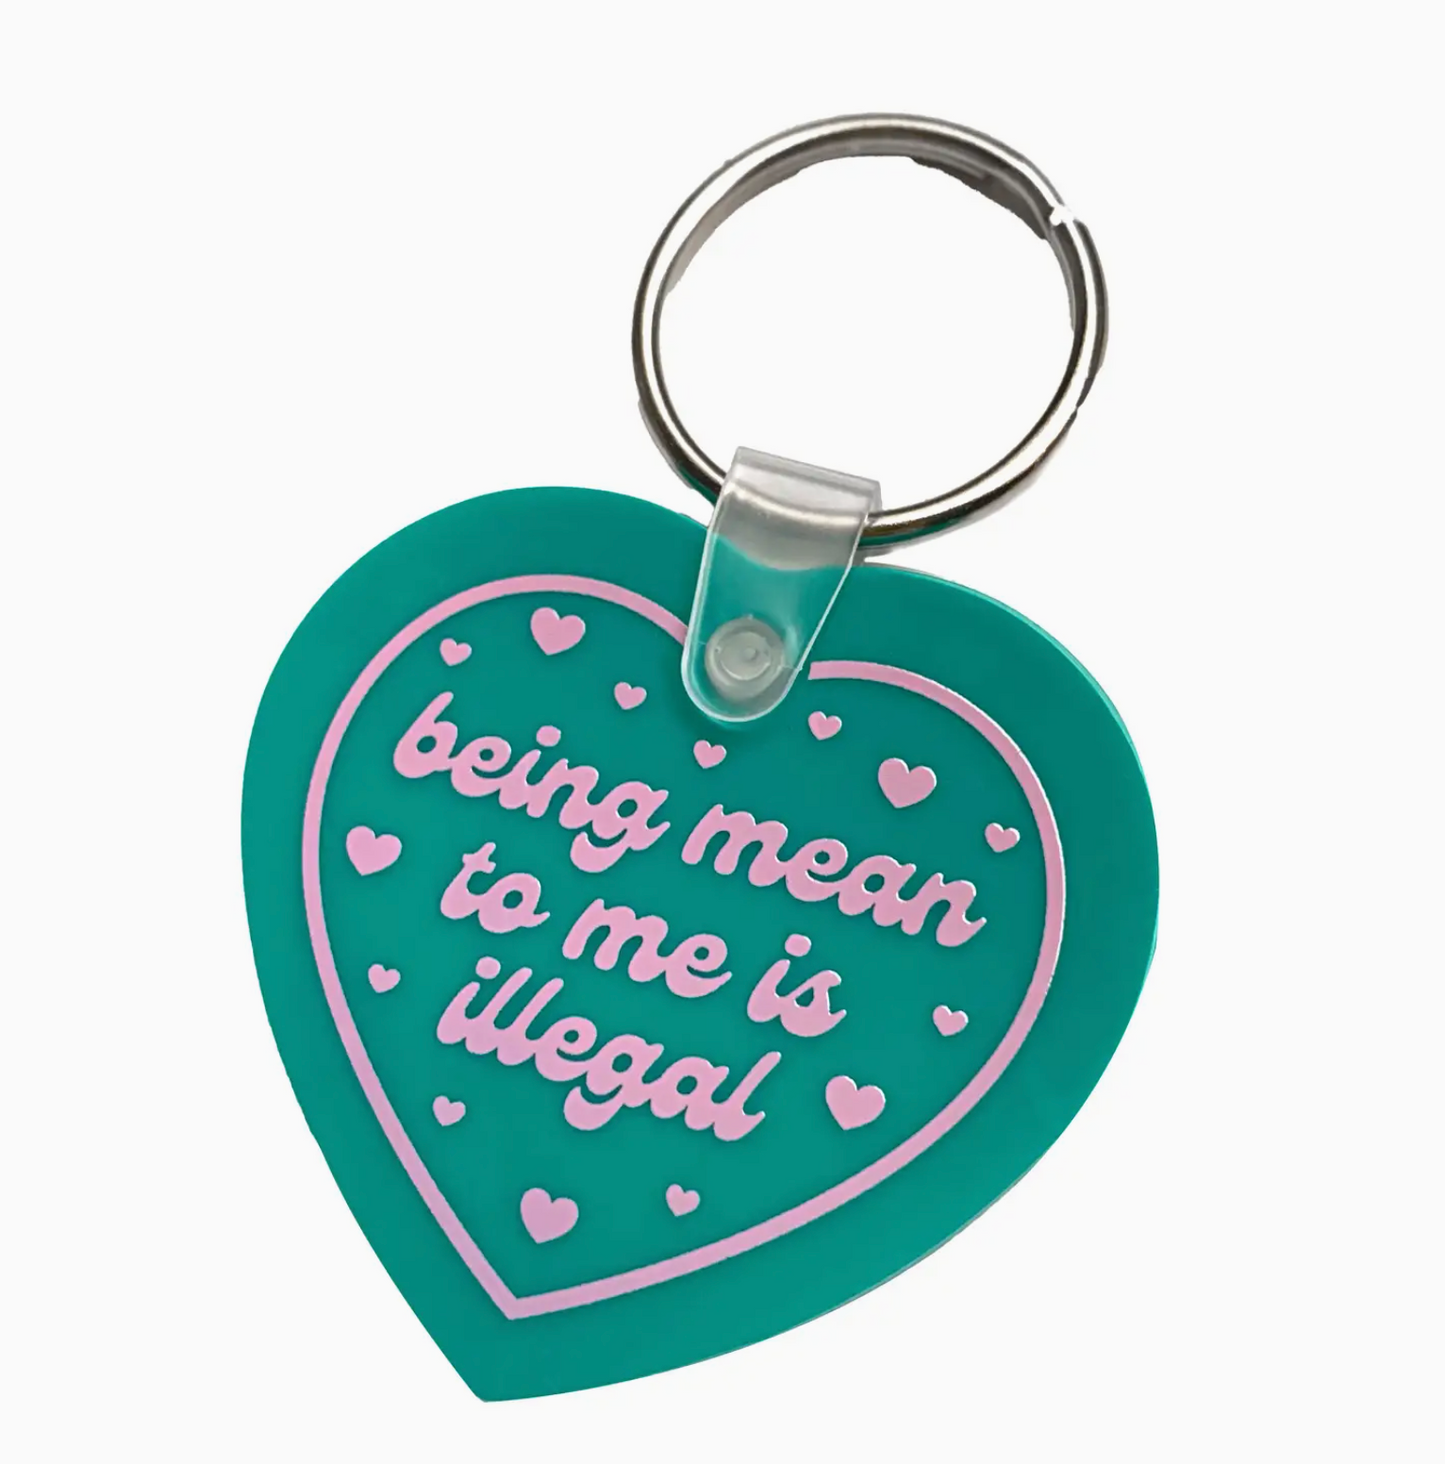 Being Mean To Me Is Illegal Vinyl Keychain